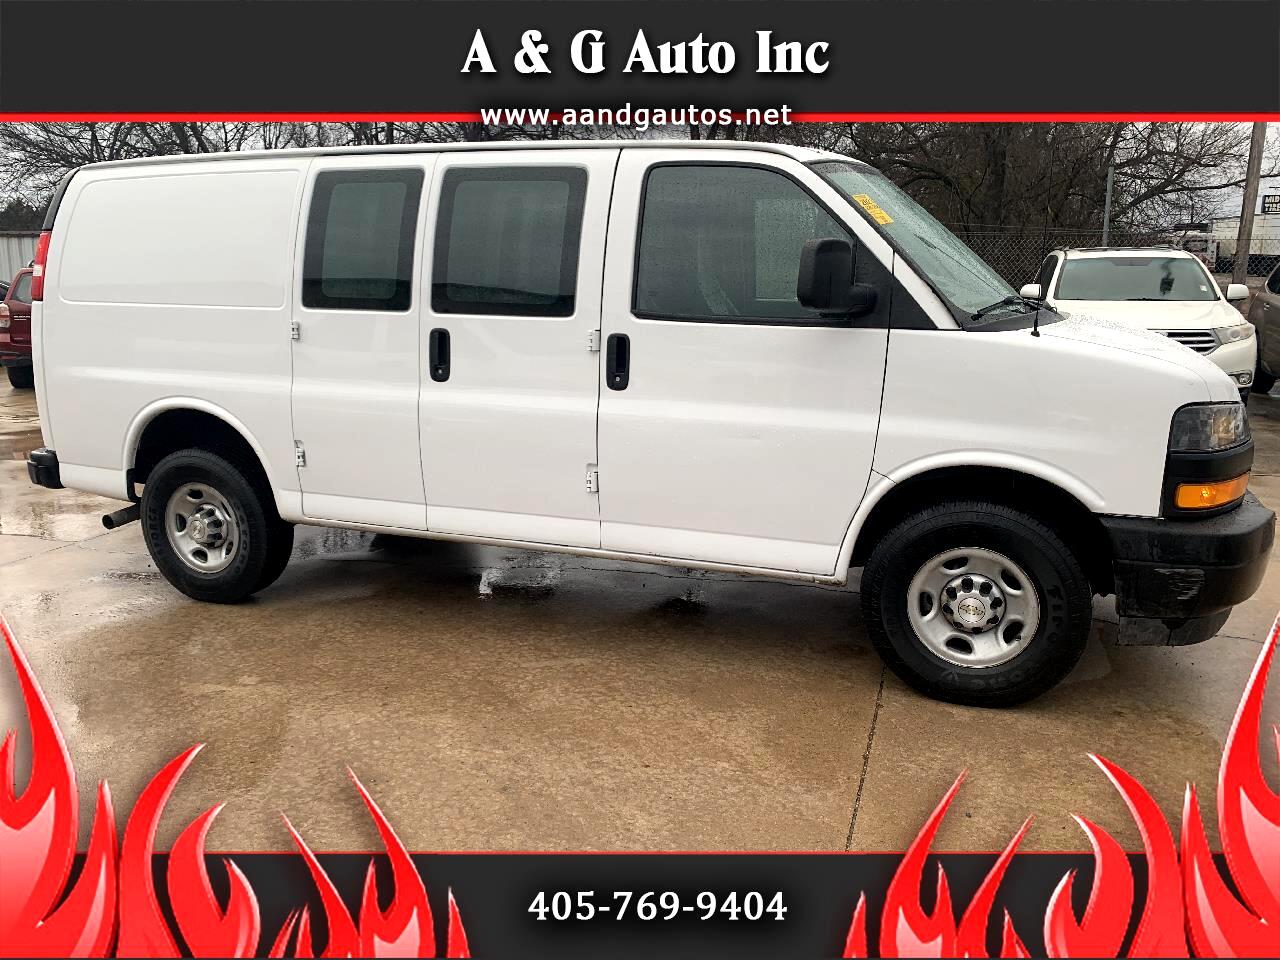 2021 Chevrolet Express for sale in Oklahoma City OK 73141 by A & G Auto Inc